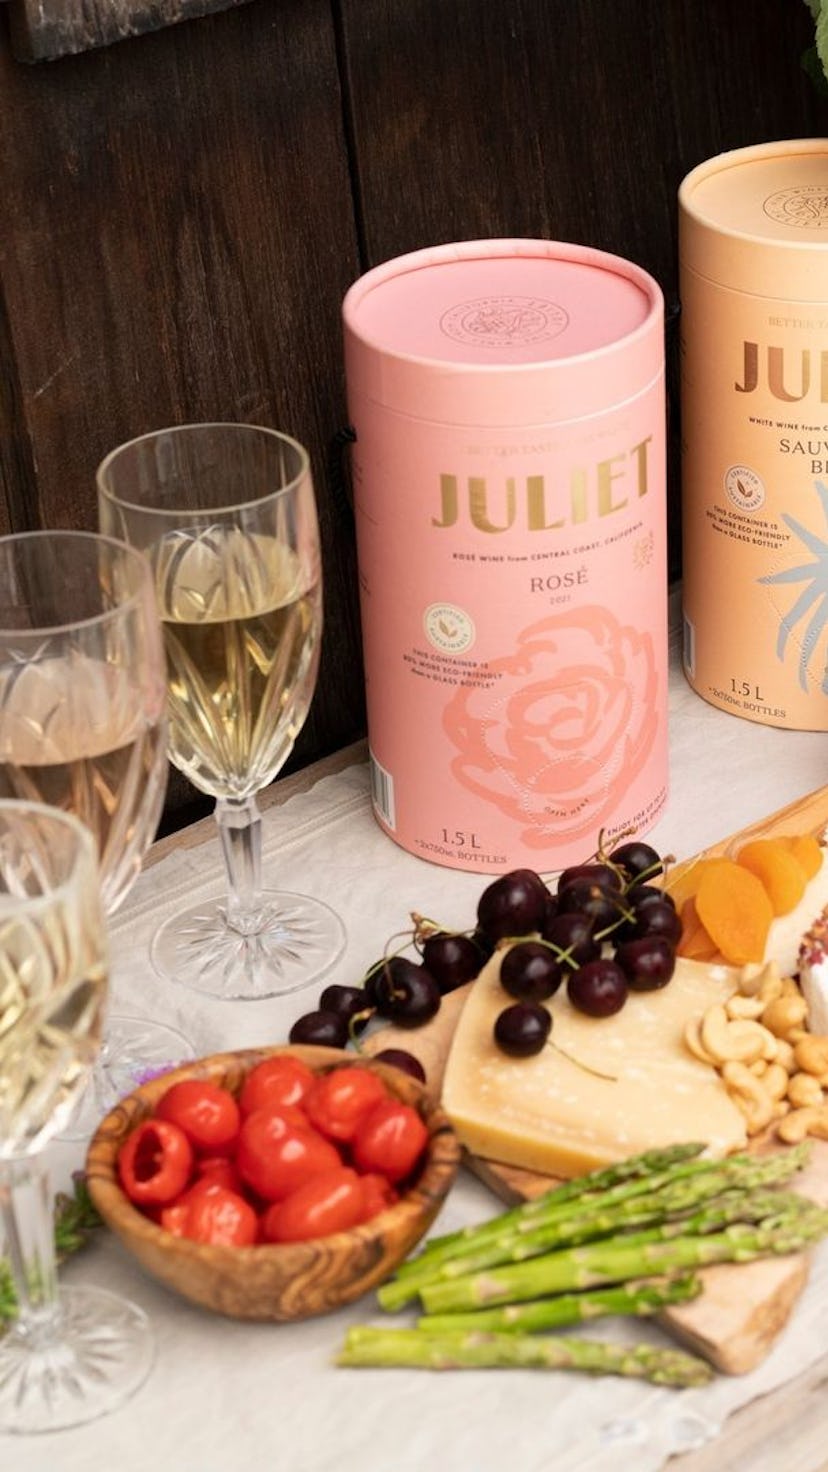 Two boxed wine packs of Sauvignon Blanc and Rose by Juliet next to glasses and a charcuterie board